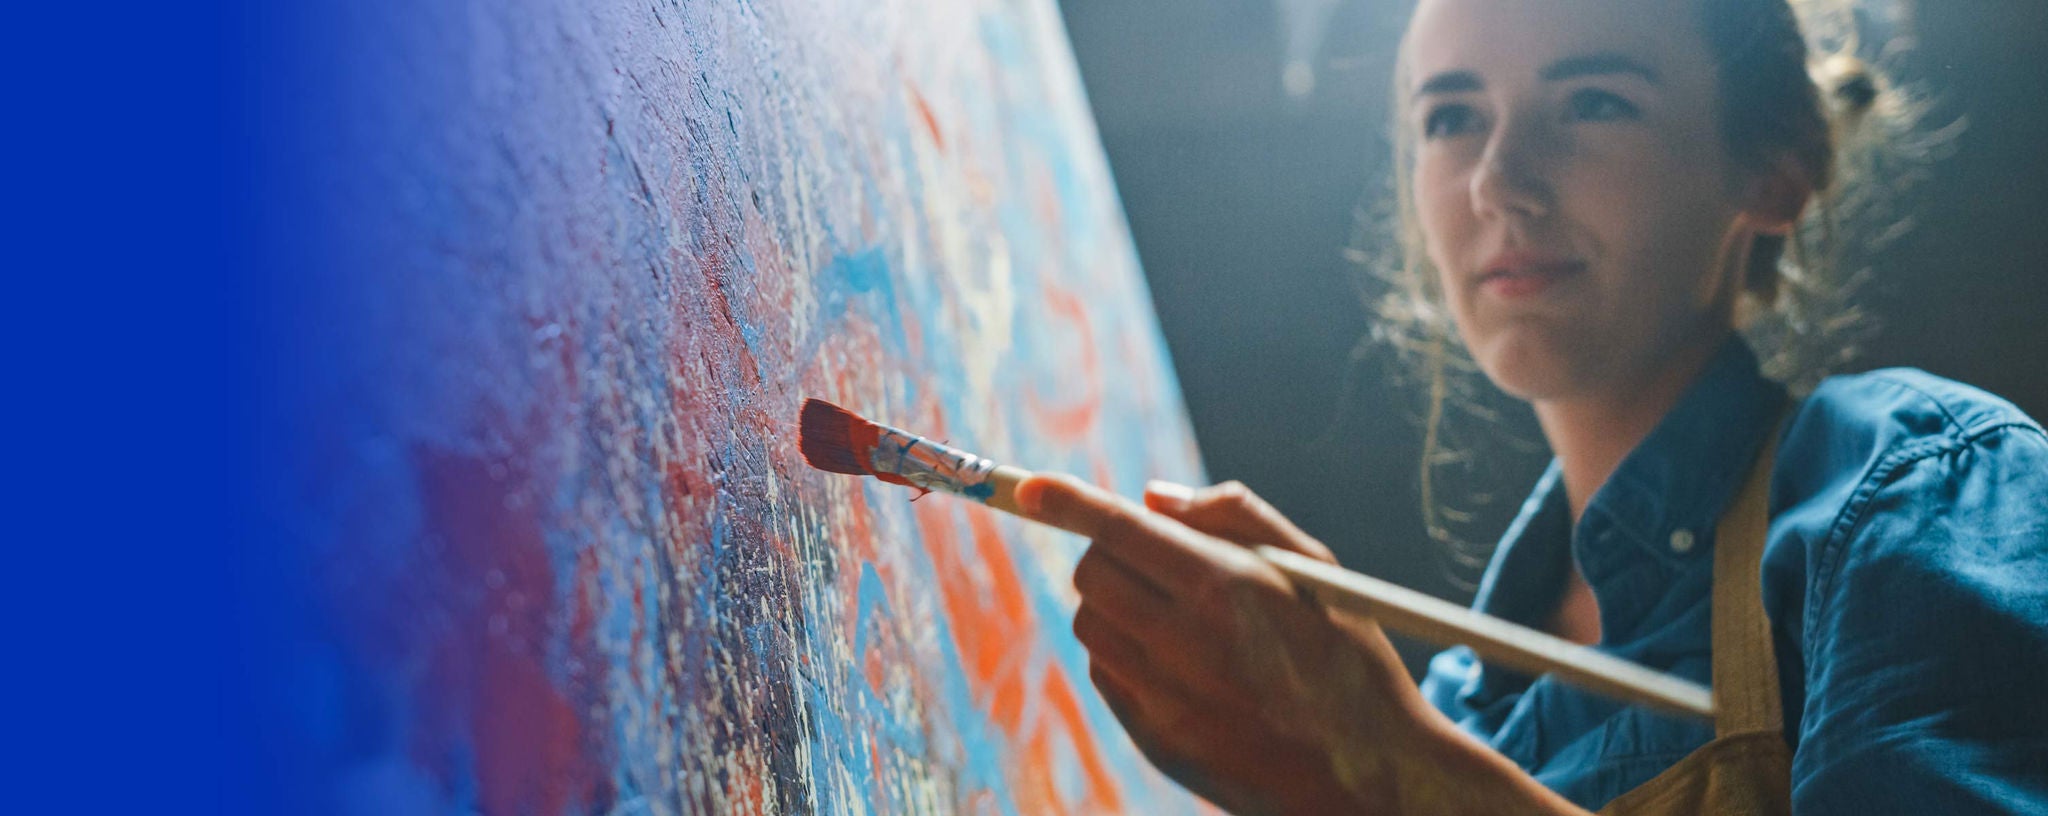 Woman painting on a canvas full of blotches of different colors.